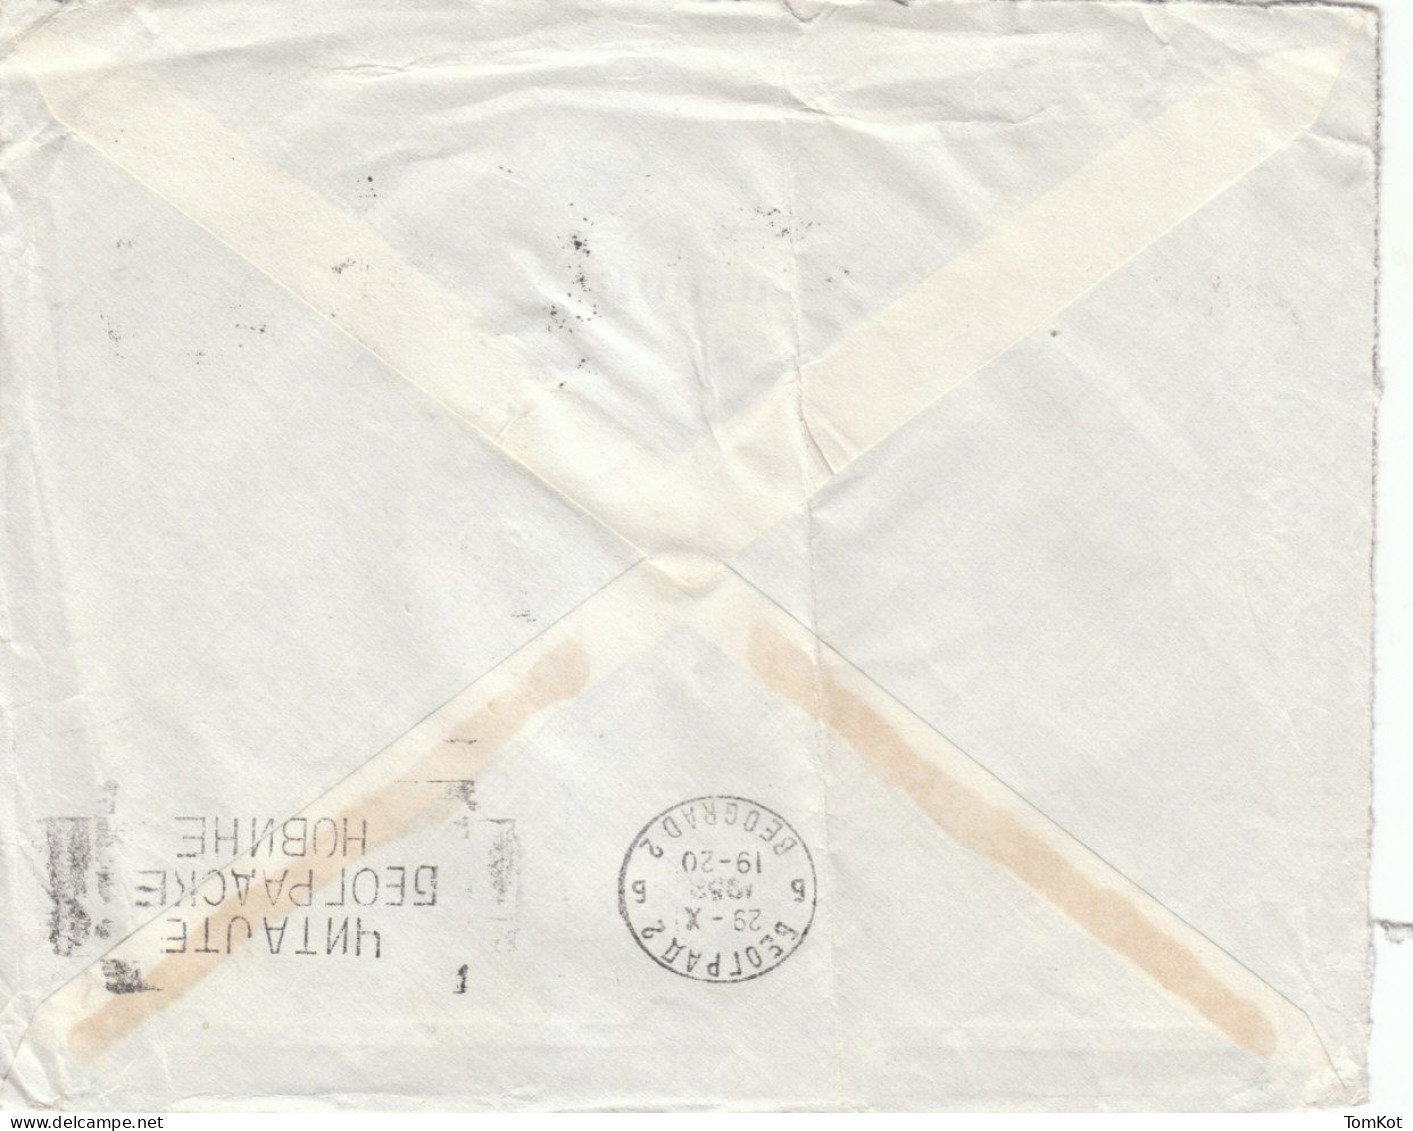 Old 1952. Cyprus Airmail Cover Famagusta To Belgrade, Serbia. 9+6 Piasters Stamps. - Briefe U. Dokumente